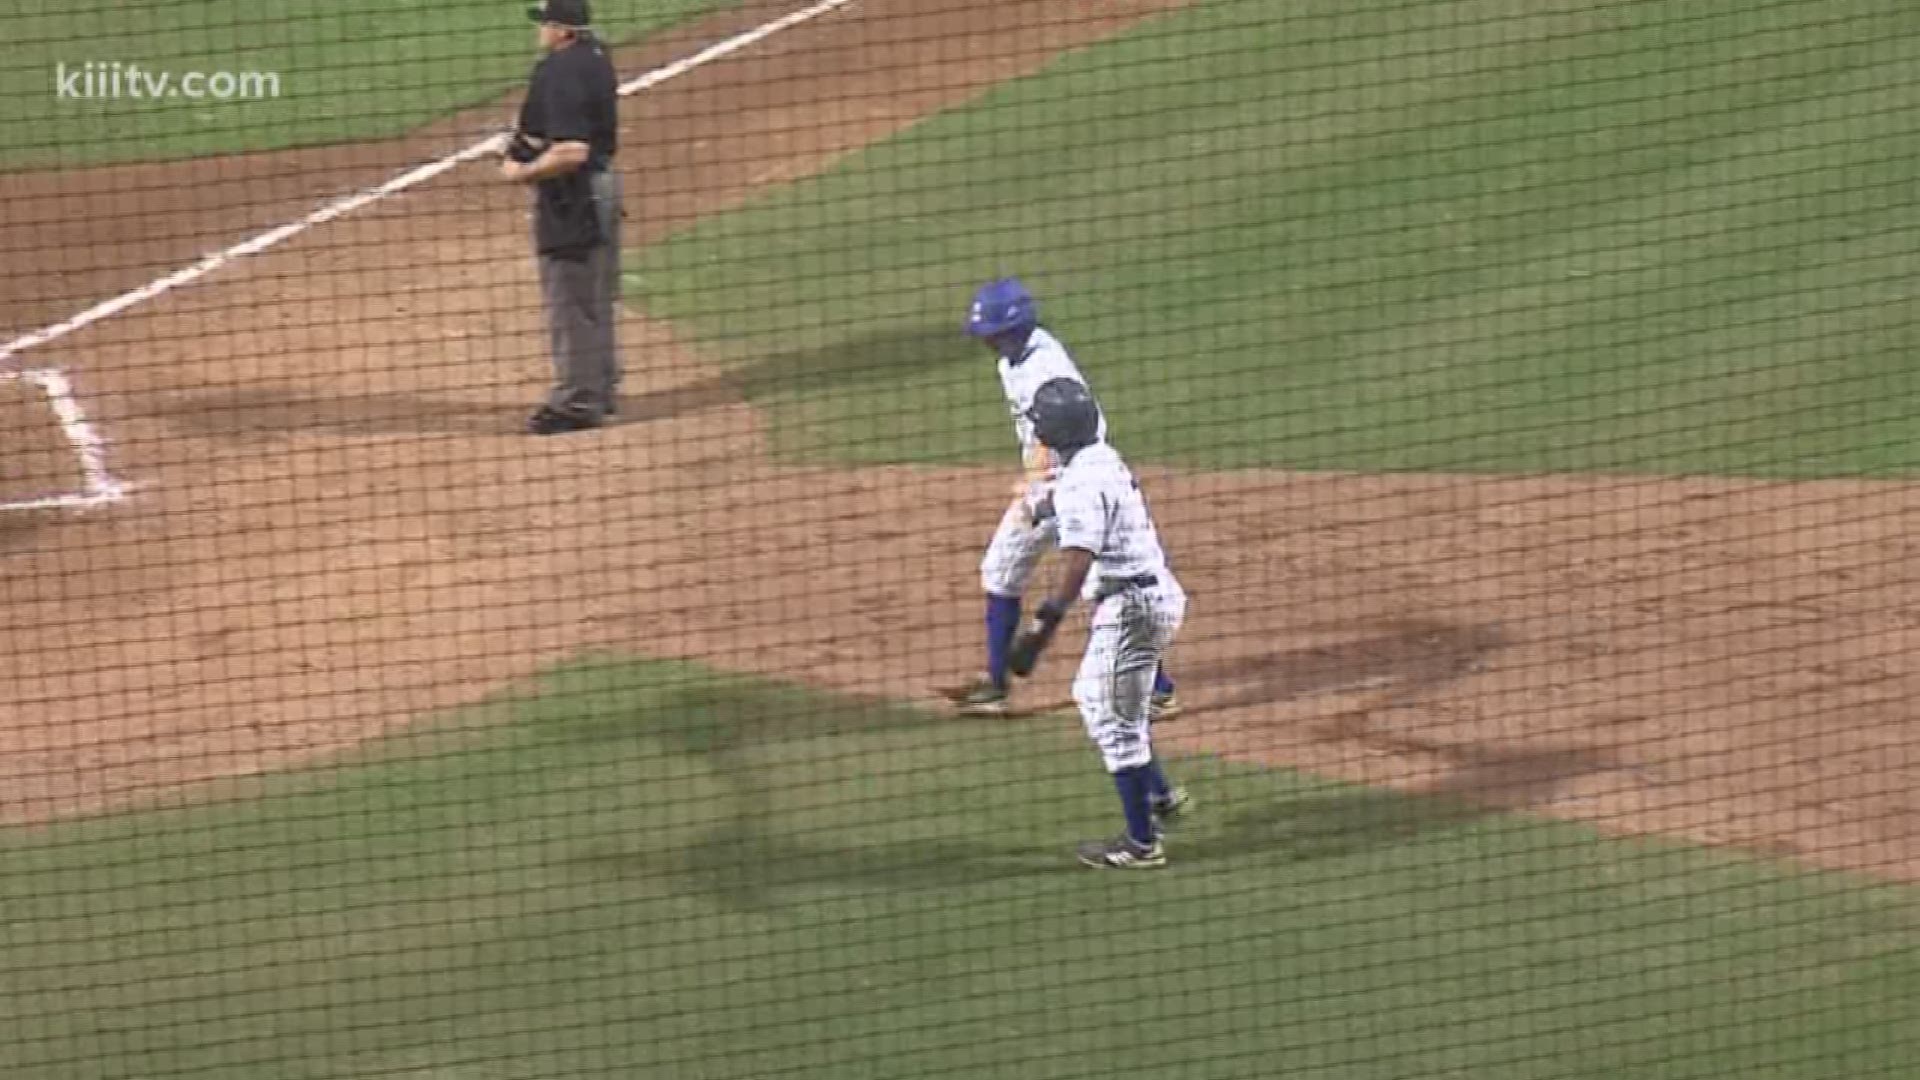 Texas A&M-Corpus Christi baseball rallied from trailing 7-3 in the 6th inning to hitting a walk-off homerun in the 9th inning.